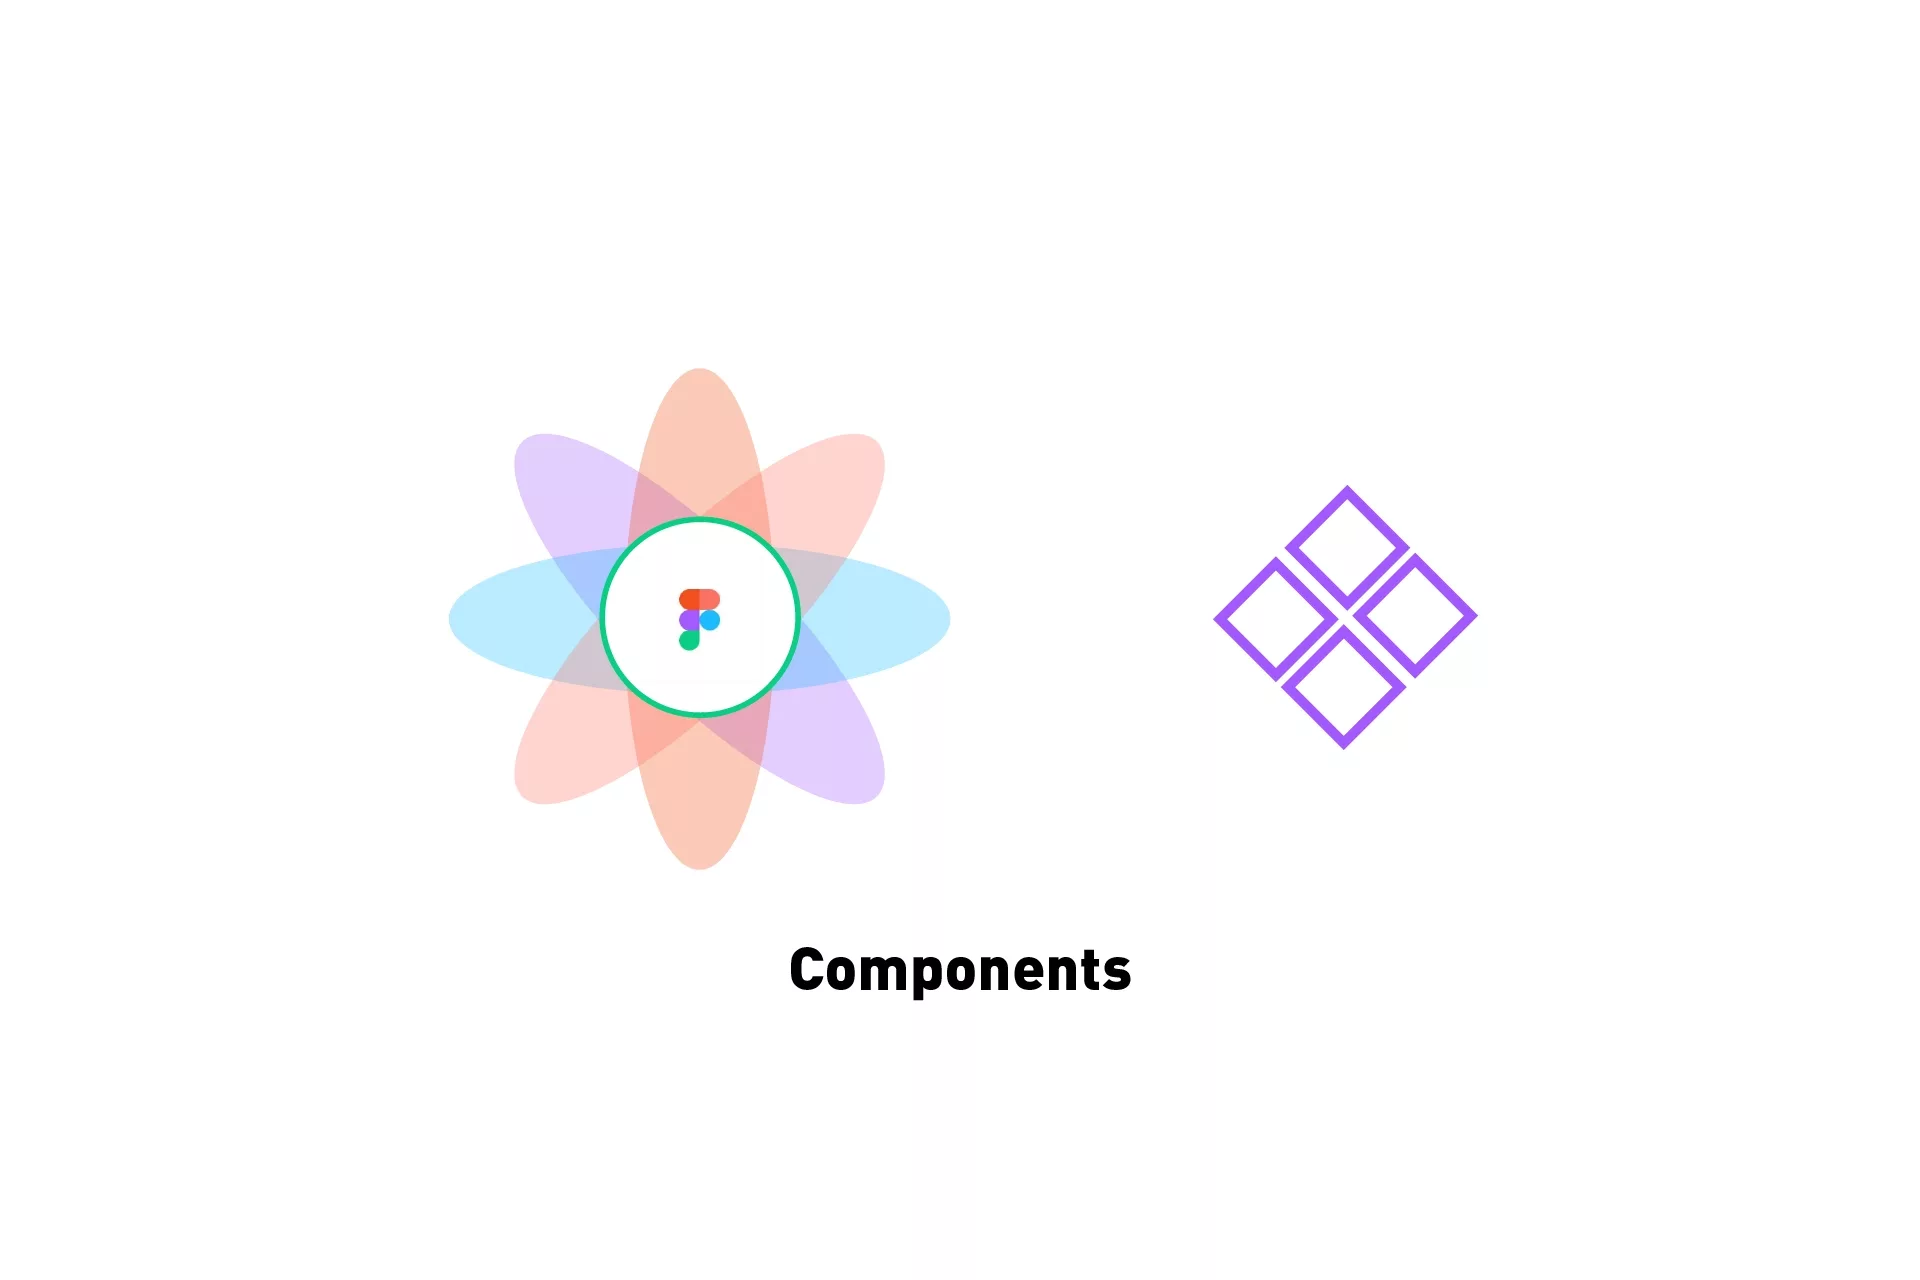 A flower representing Figma next to a diamond made of squares representing what the 'components' symbol is on Figma. The text "Components" sits below it.